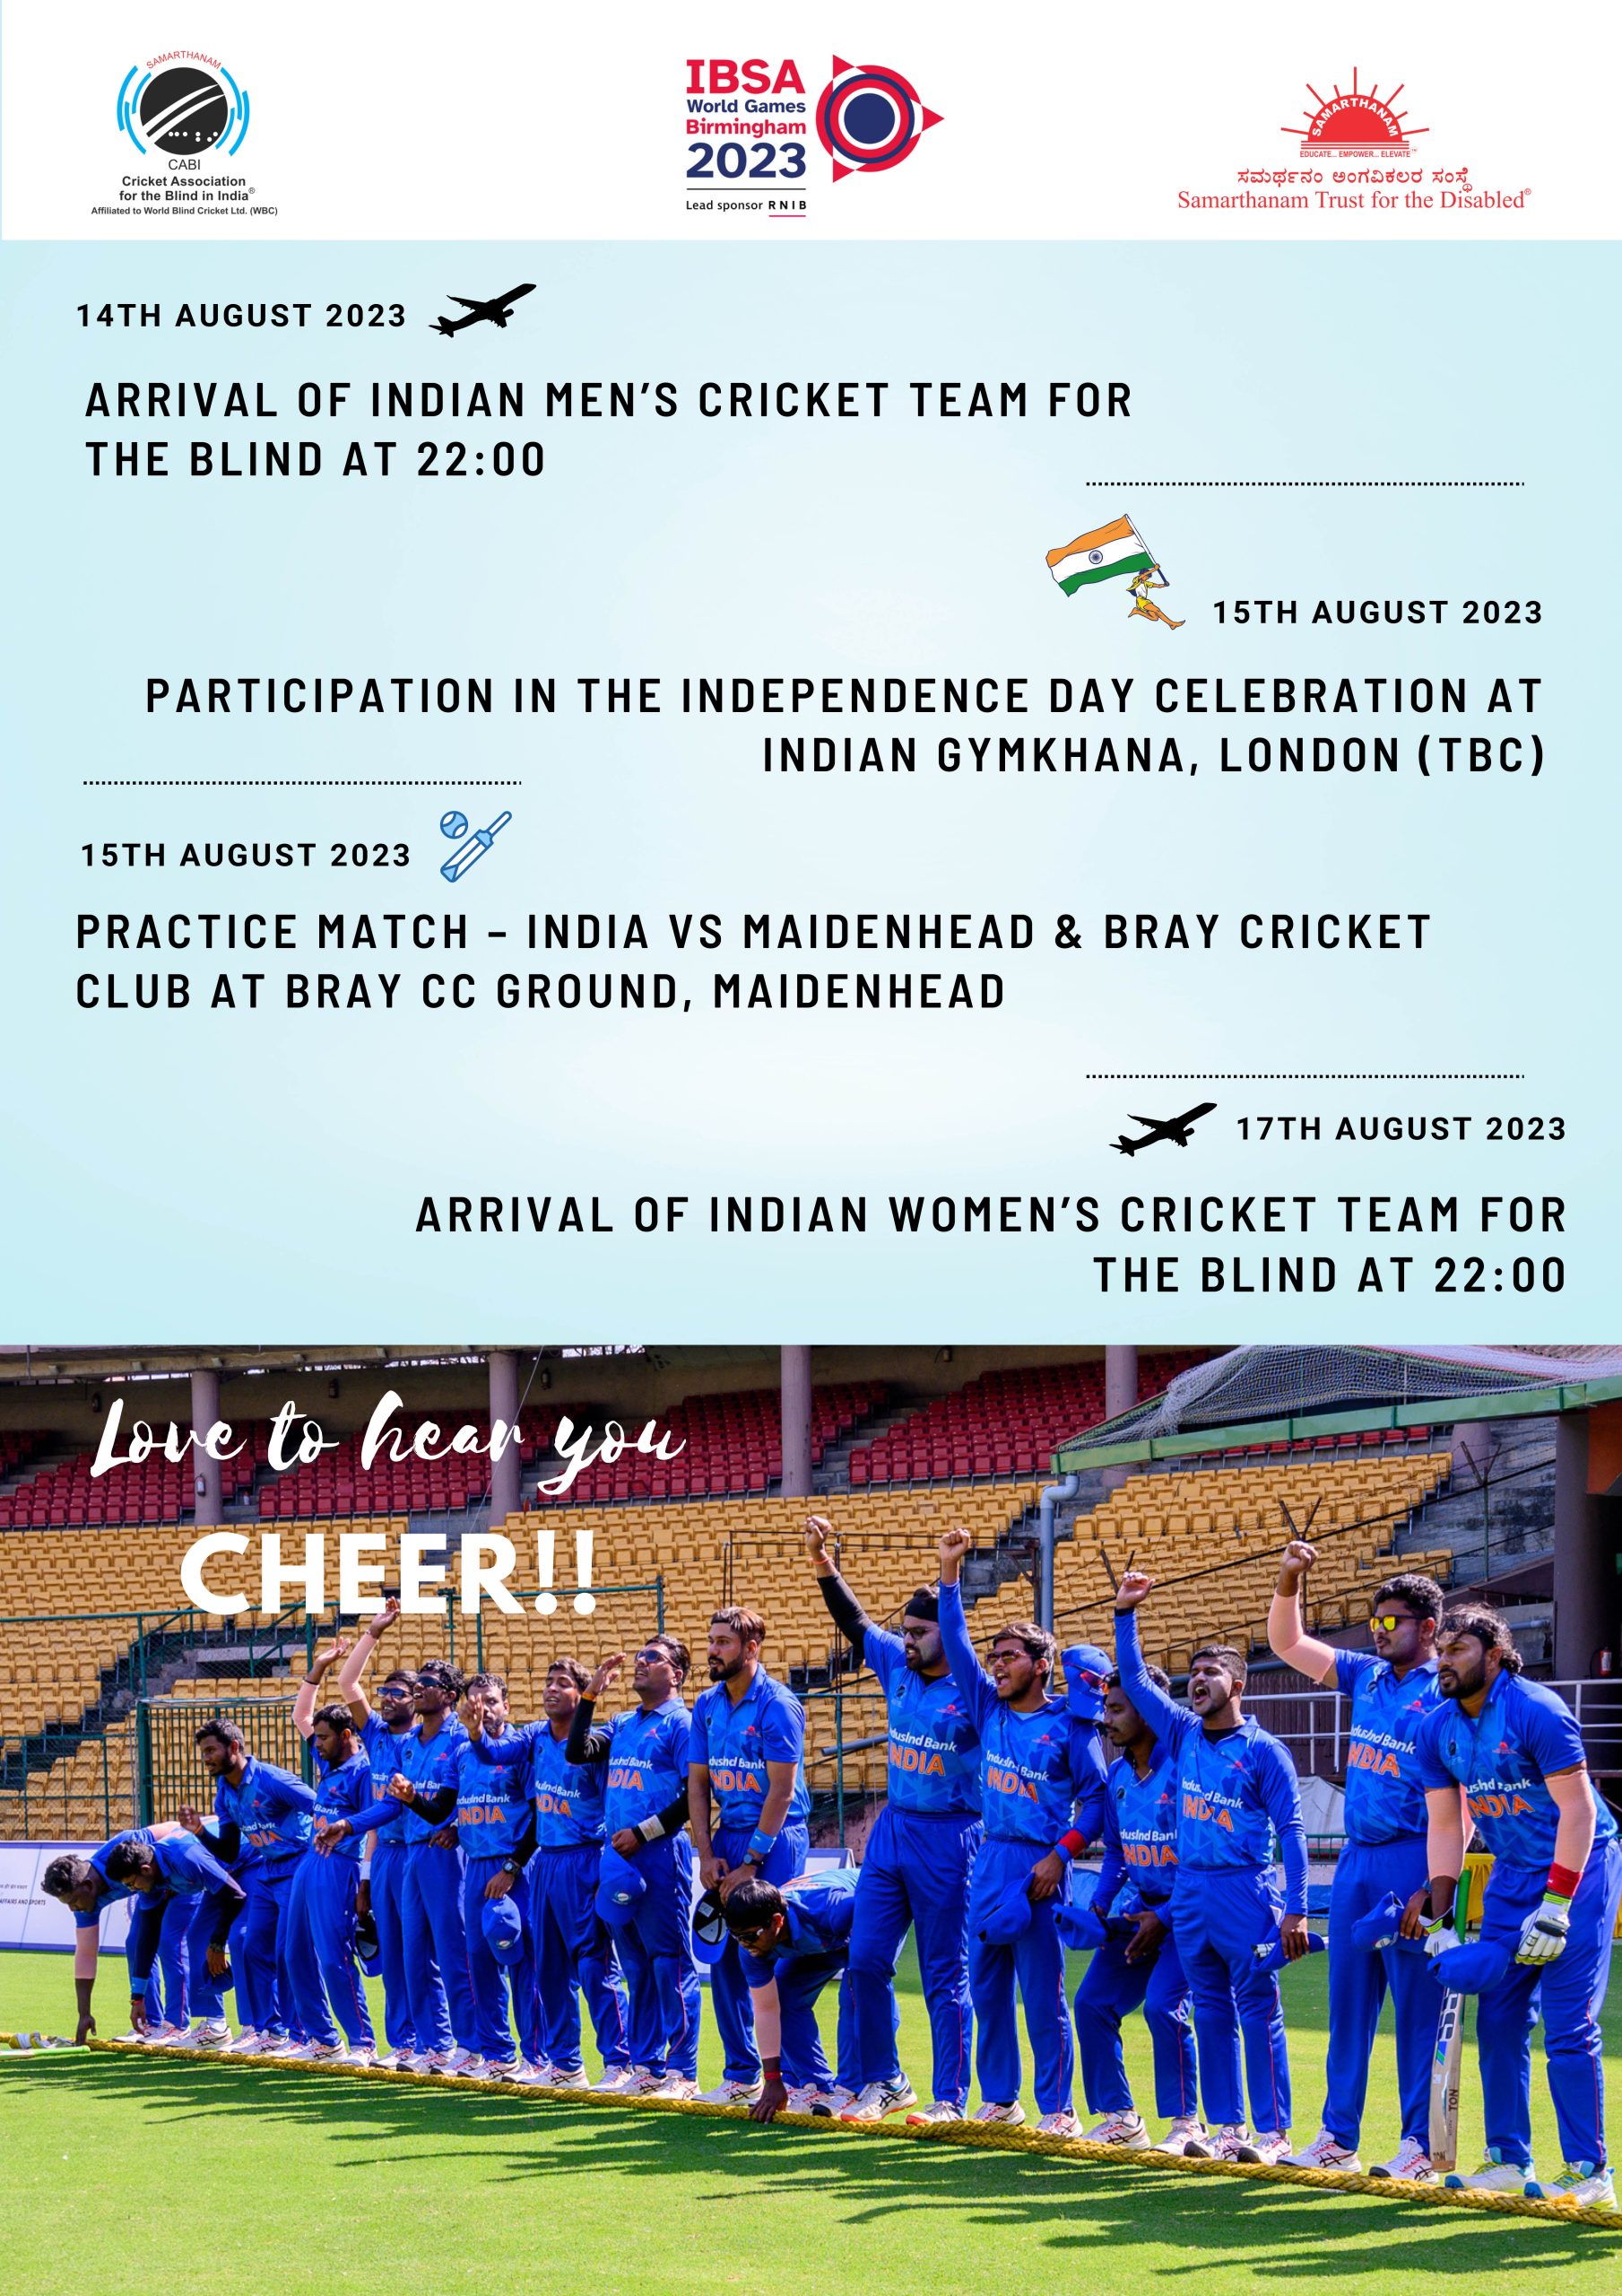 IBSA WORLD GAMES MATCH SCHEDULE CRICKET ASSOCIATION FOR THE BLIND IN